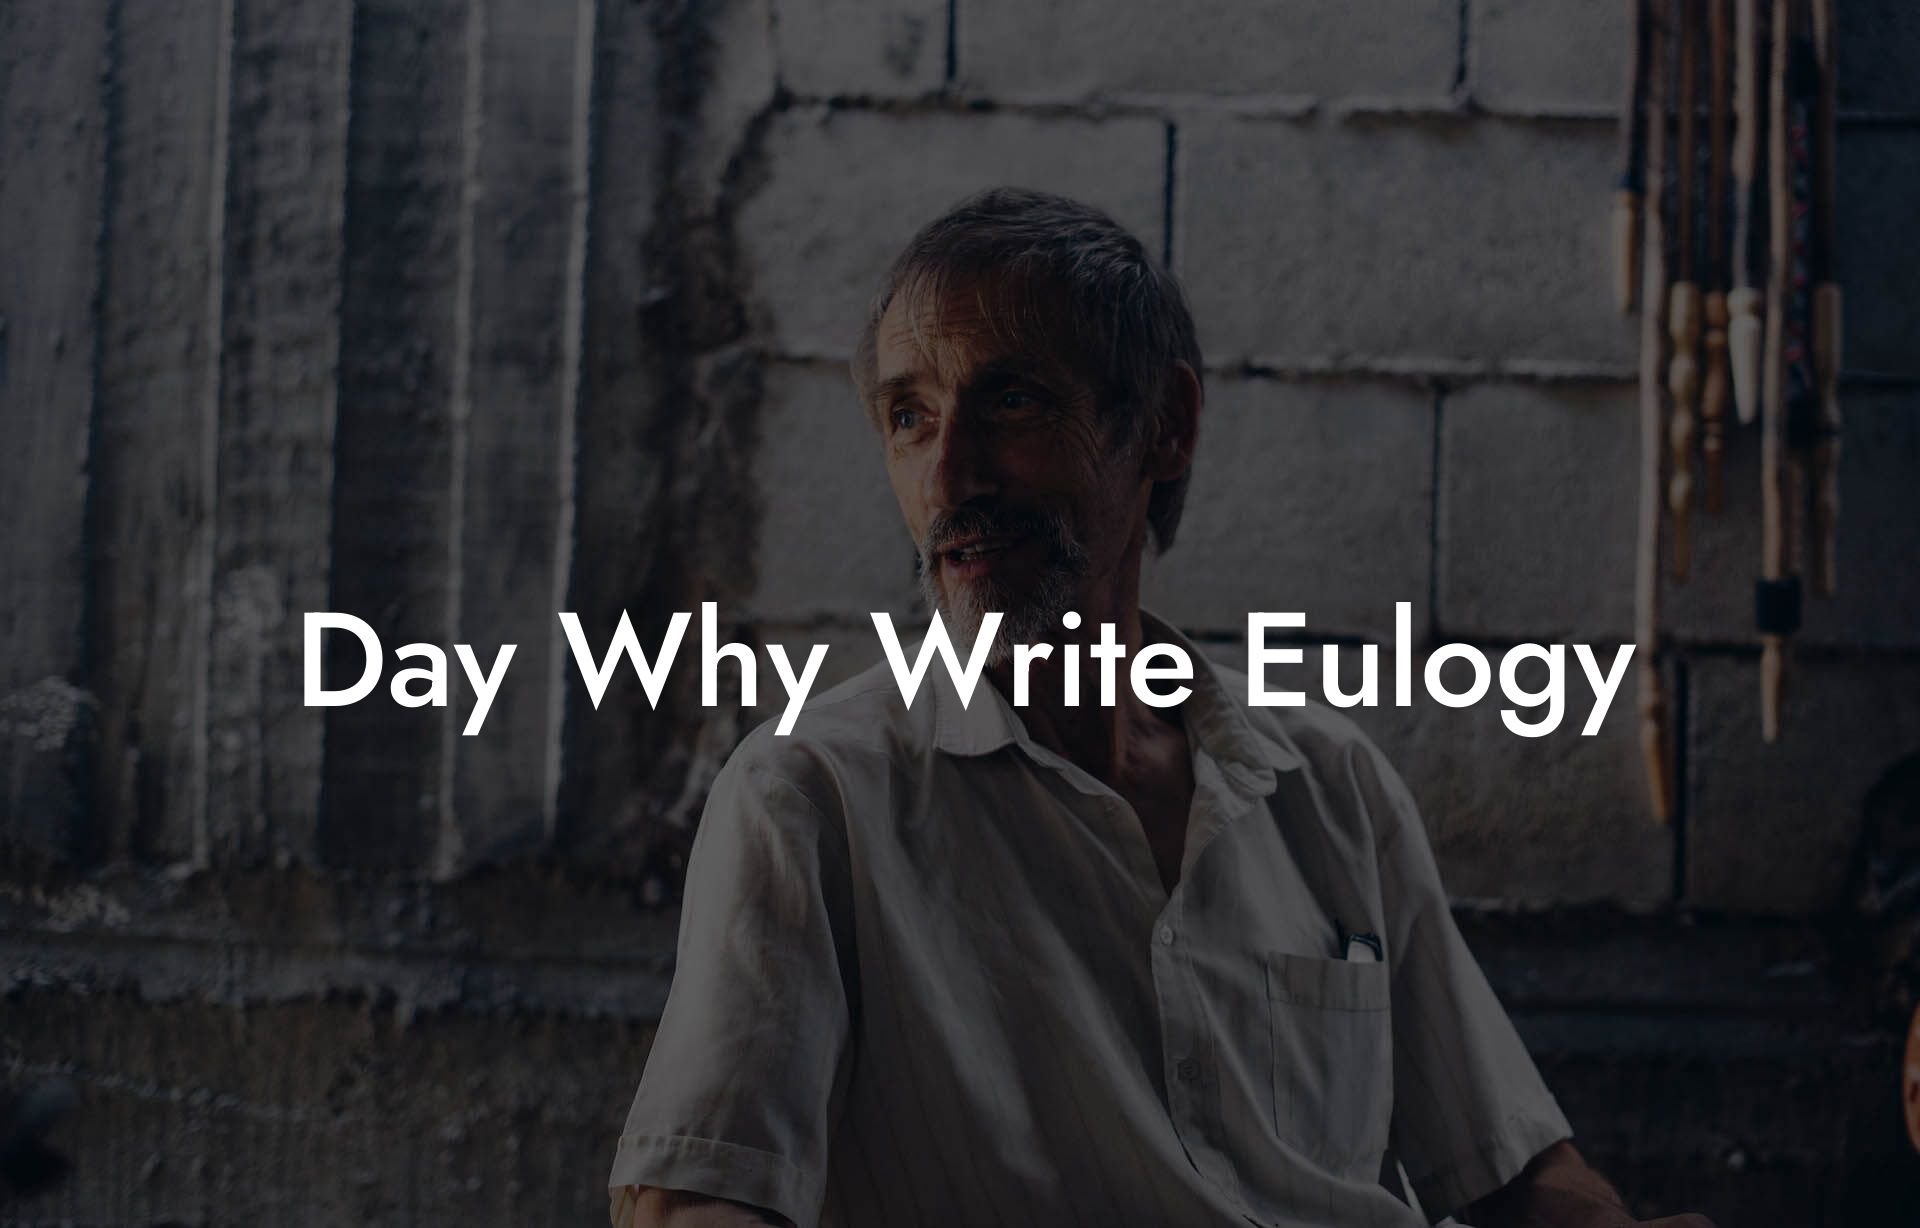 Day Why Write Eulogy